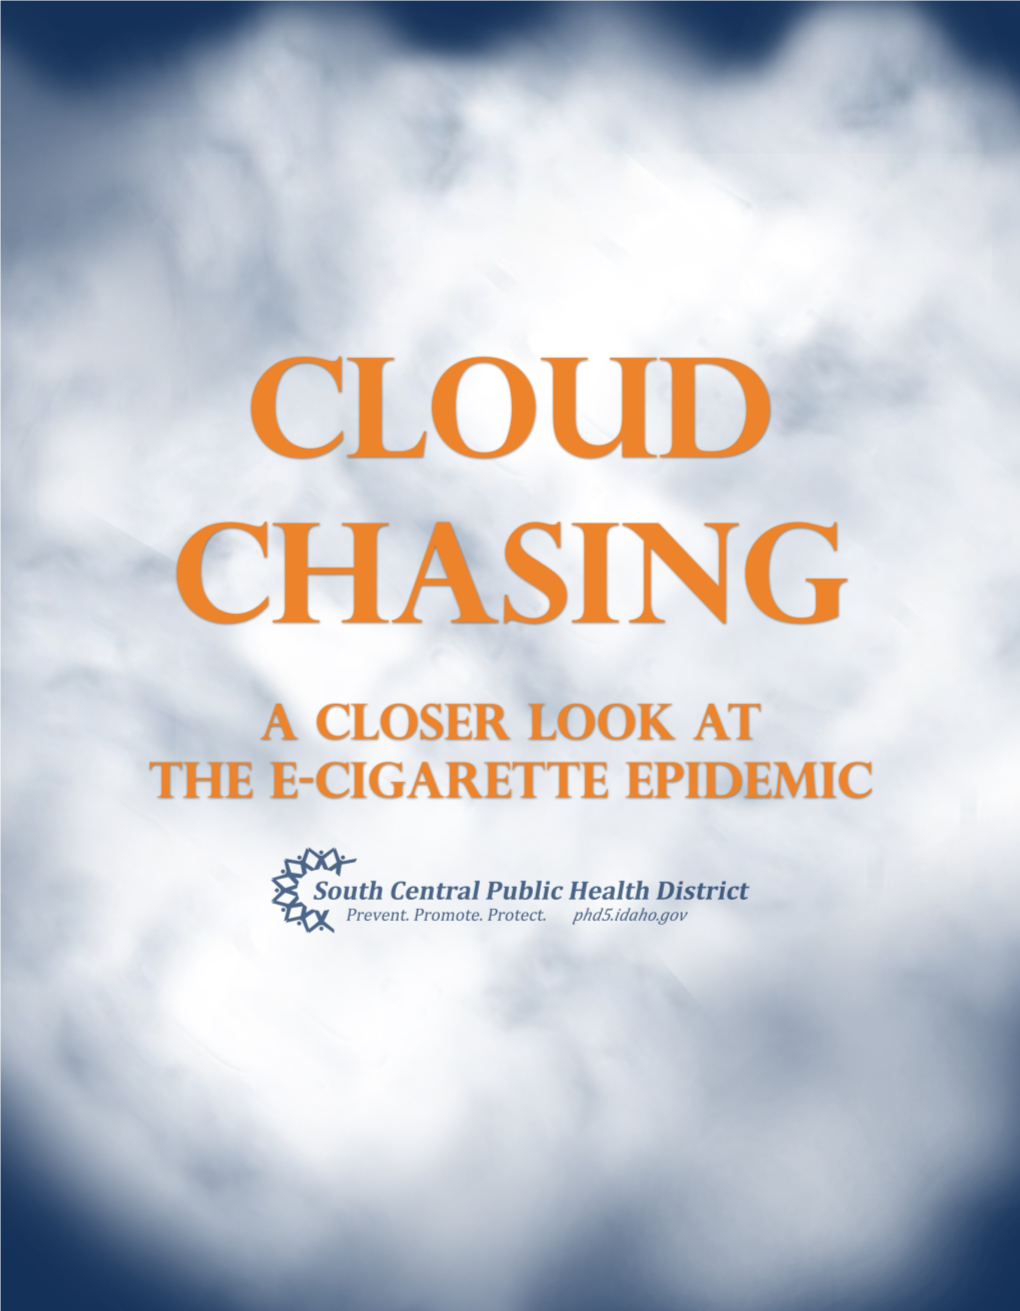 Cloud Chasing a Closer Look at the E-Cigarette Epidemic